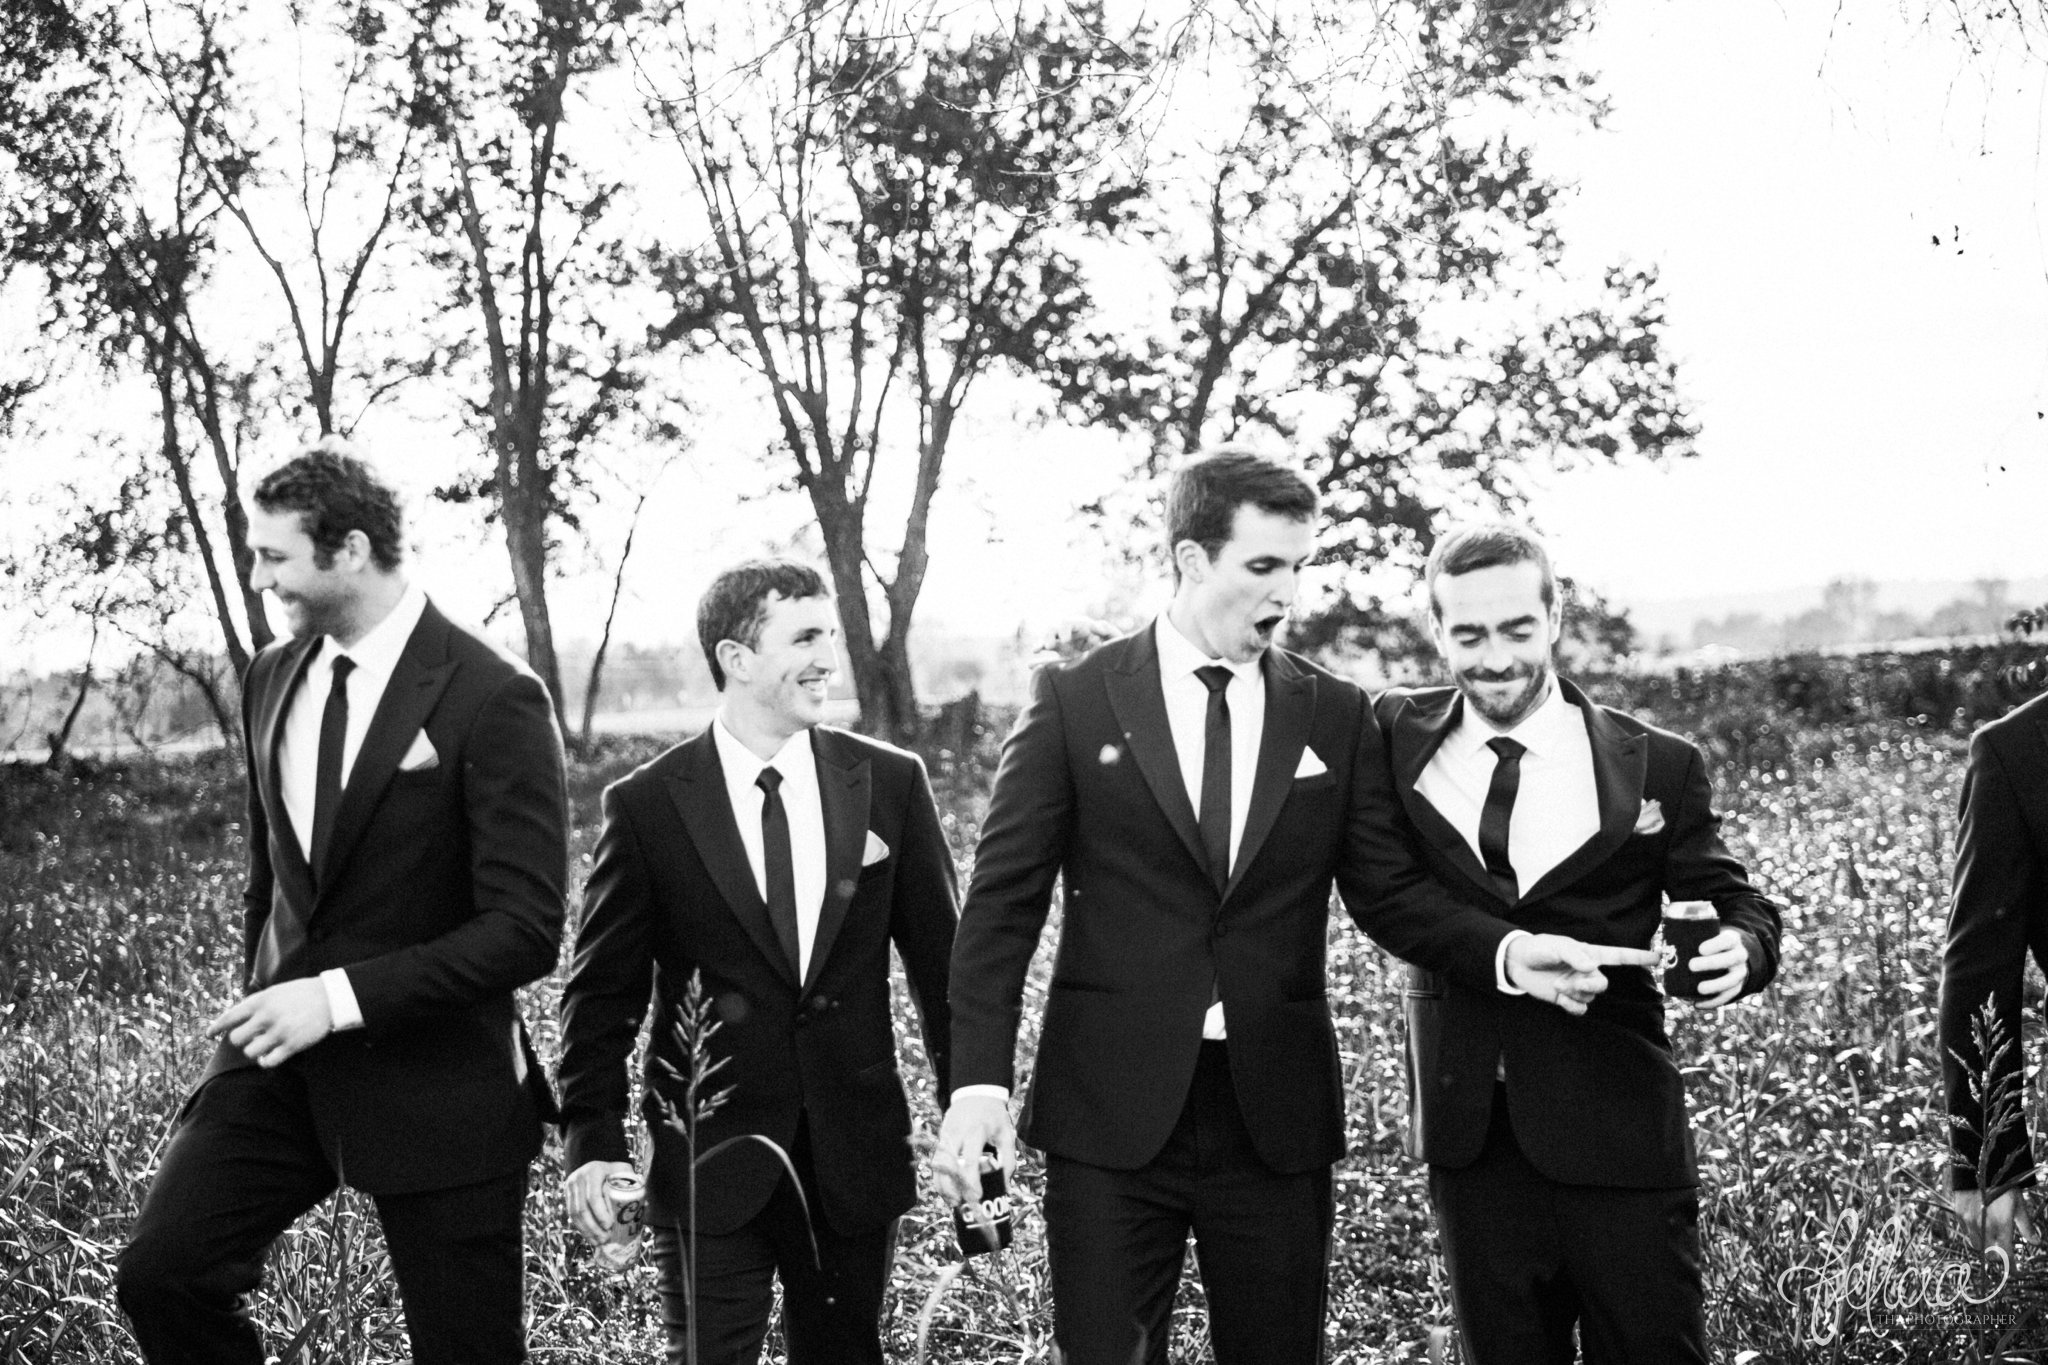 black and white | weddings | wedding photos | wedding photography | images by feliciathephotographer.com | St. Therese Catholic Church | Kansas City | downtown | The Terrace on Grand | bridal party portraits | grassy field | field | nature | candid | groomsmen portrait | funny groomsmen | The Black Tux